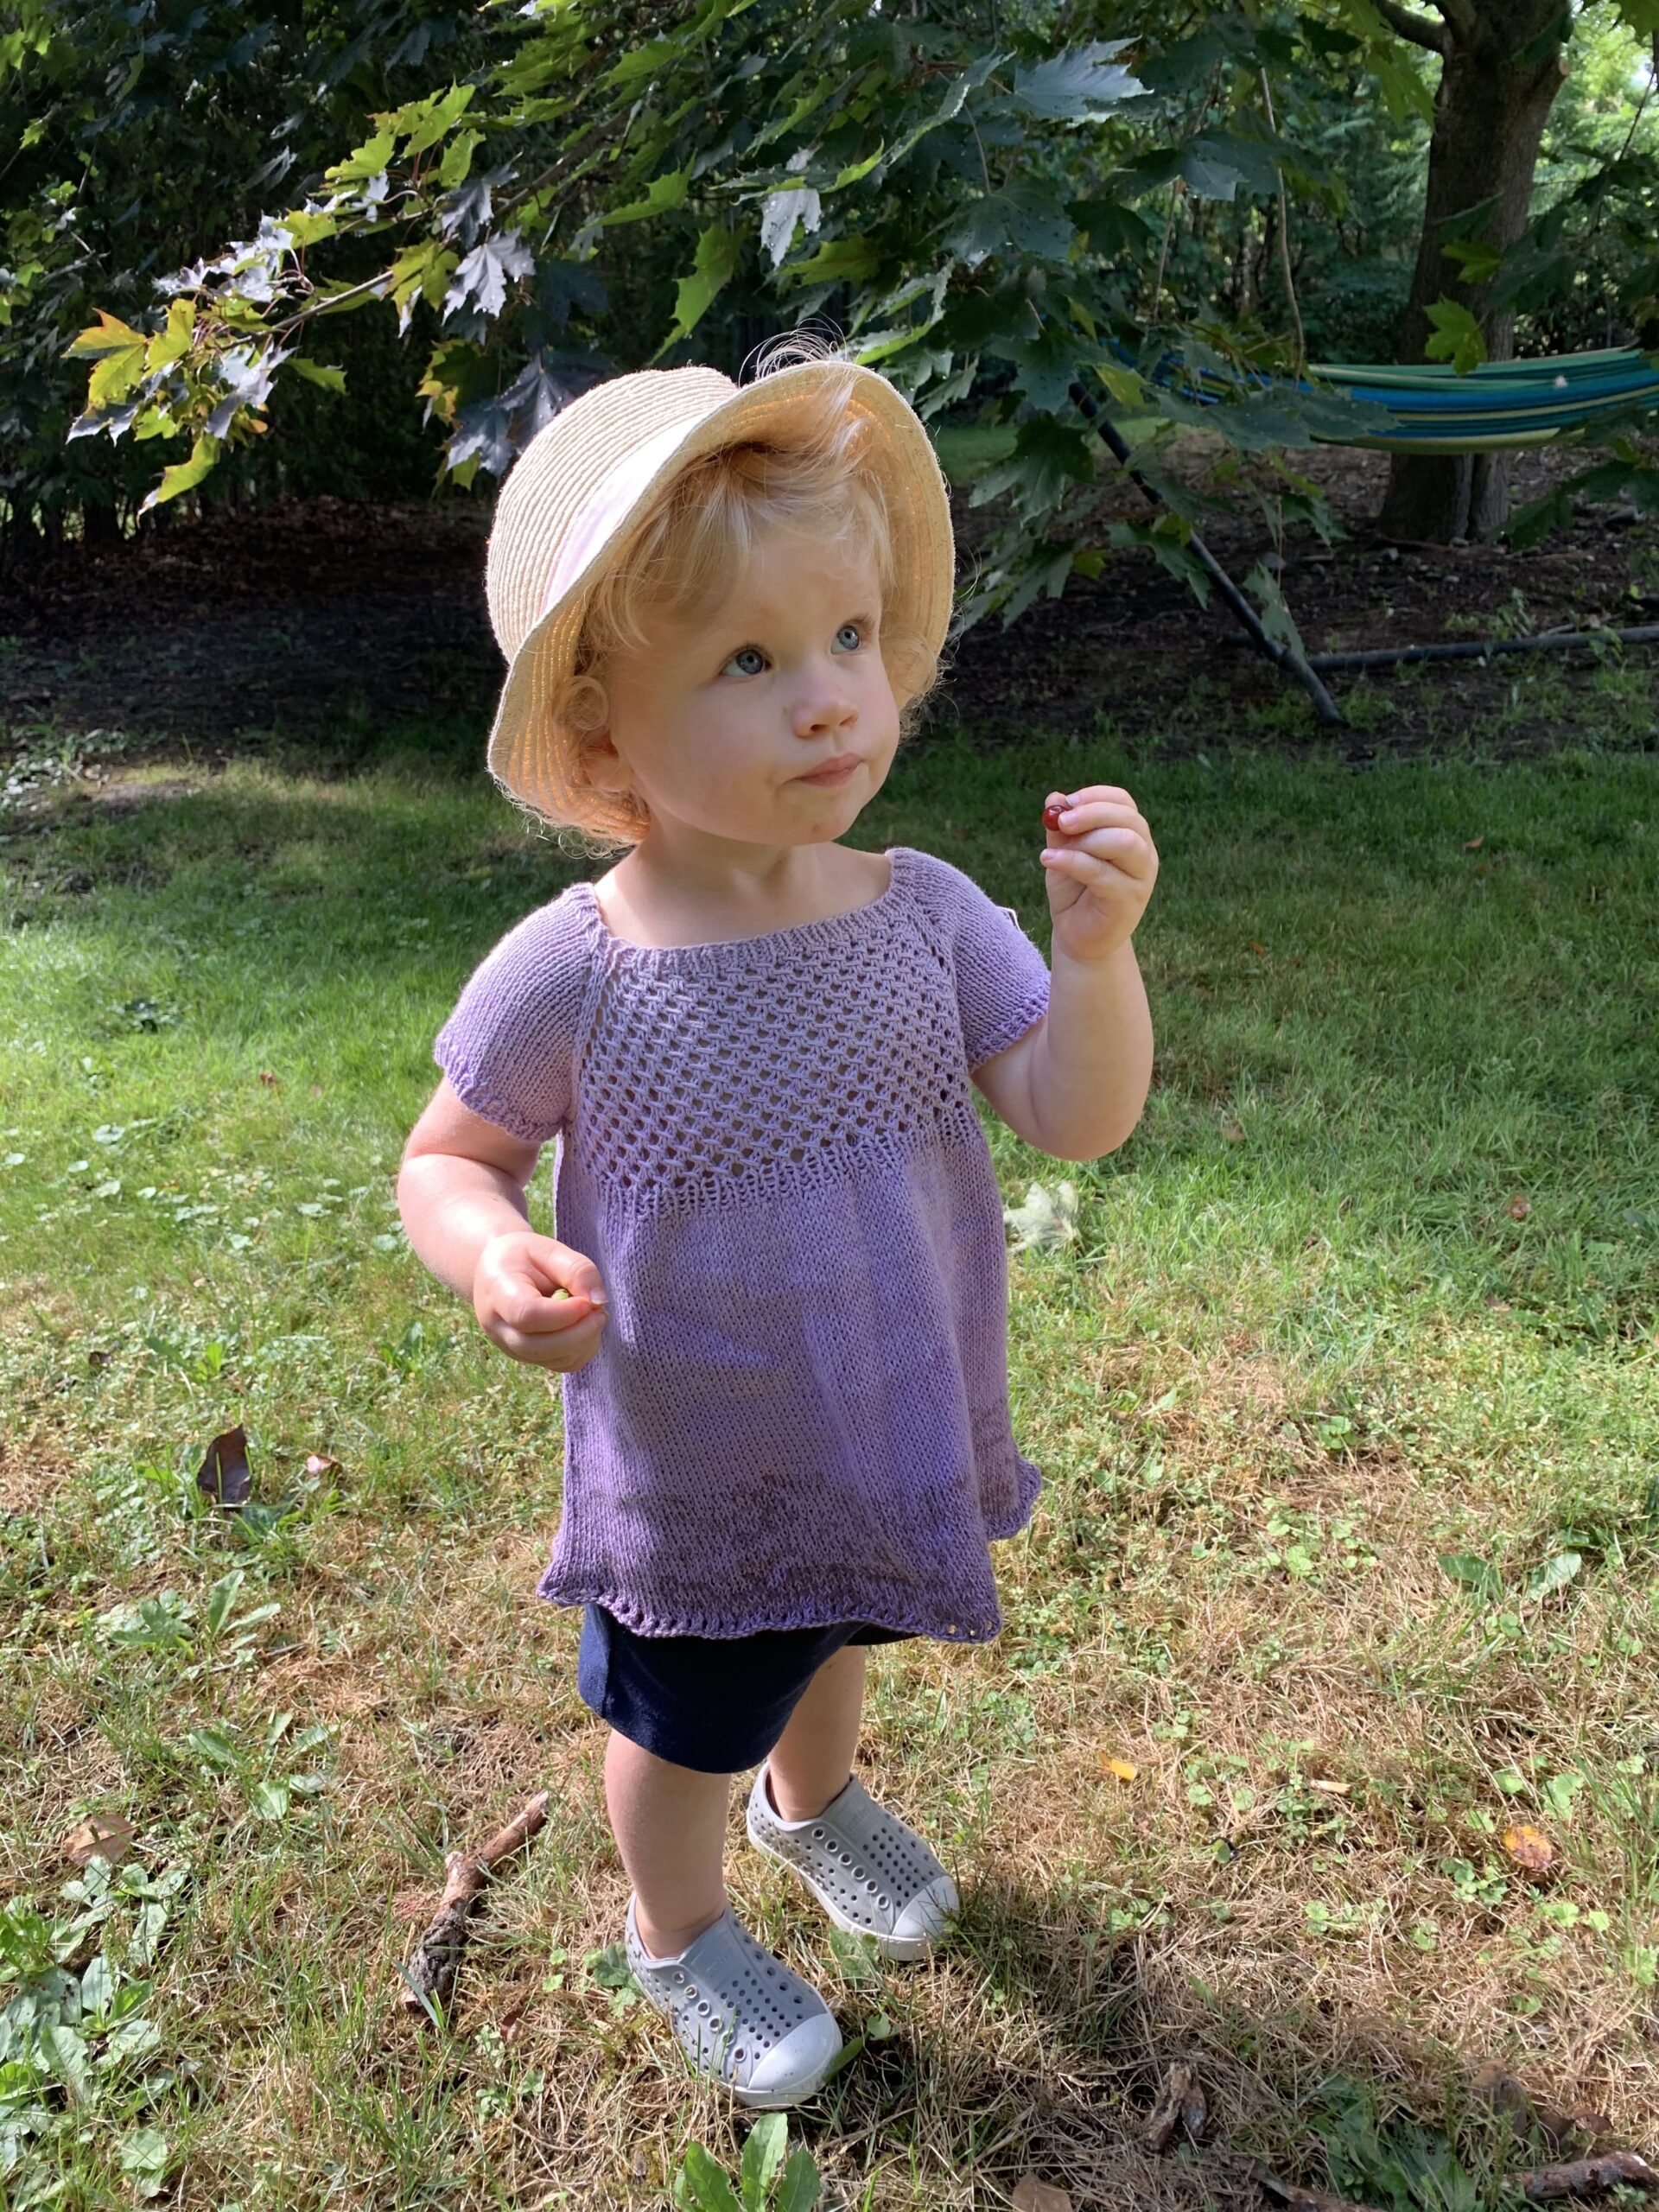 A blonde toddler in a sun hat, standing in a garden picking berries, modelling a lilac ombre babydoll tee with lace bodice and eyelet hem.